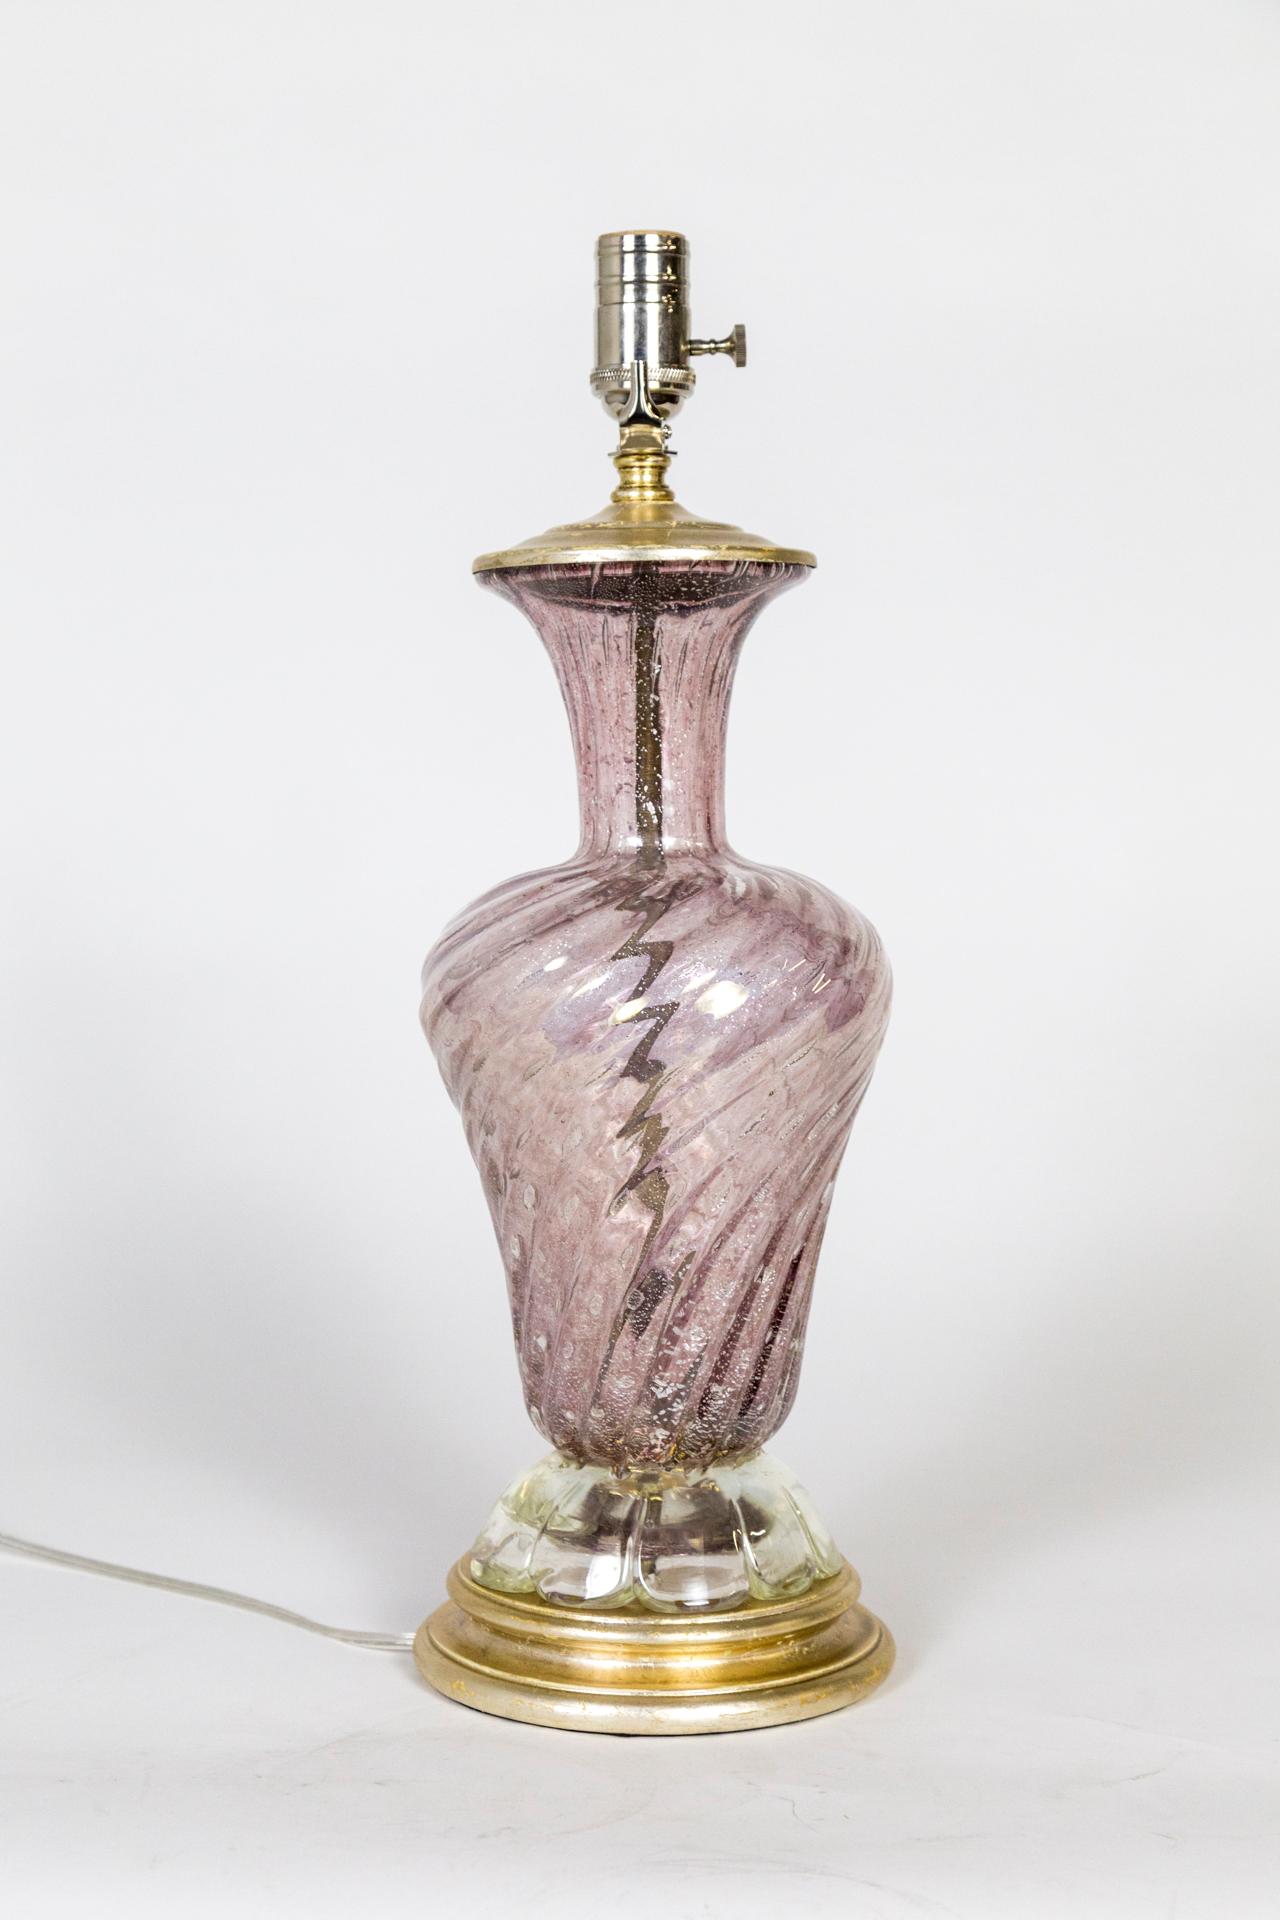 A Murano glass lamp swirled into an urn shape with scalloped bottom in transparent dusty rose color with silver flecks; silver gilt base and cap. Polished nickel hardware aged silver leaf gilding on the base and cap. Newly wired. Measures: 7